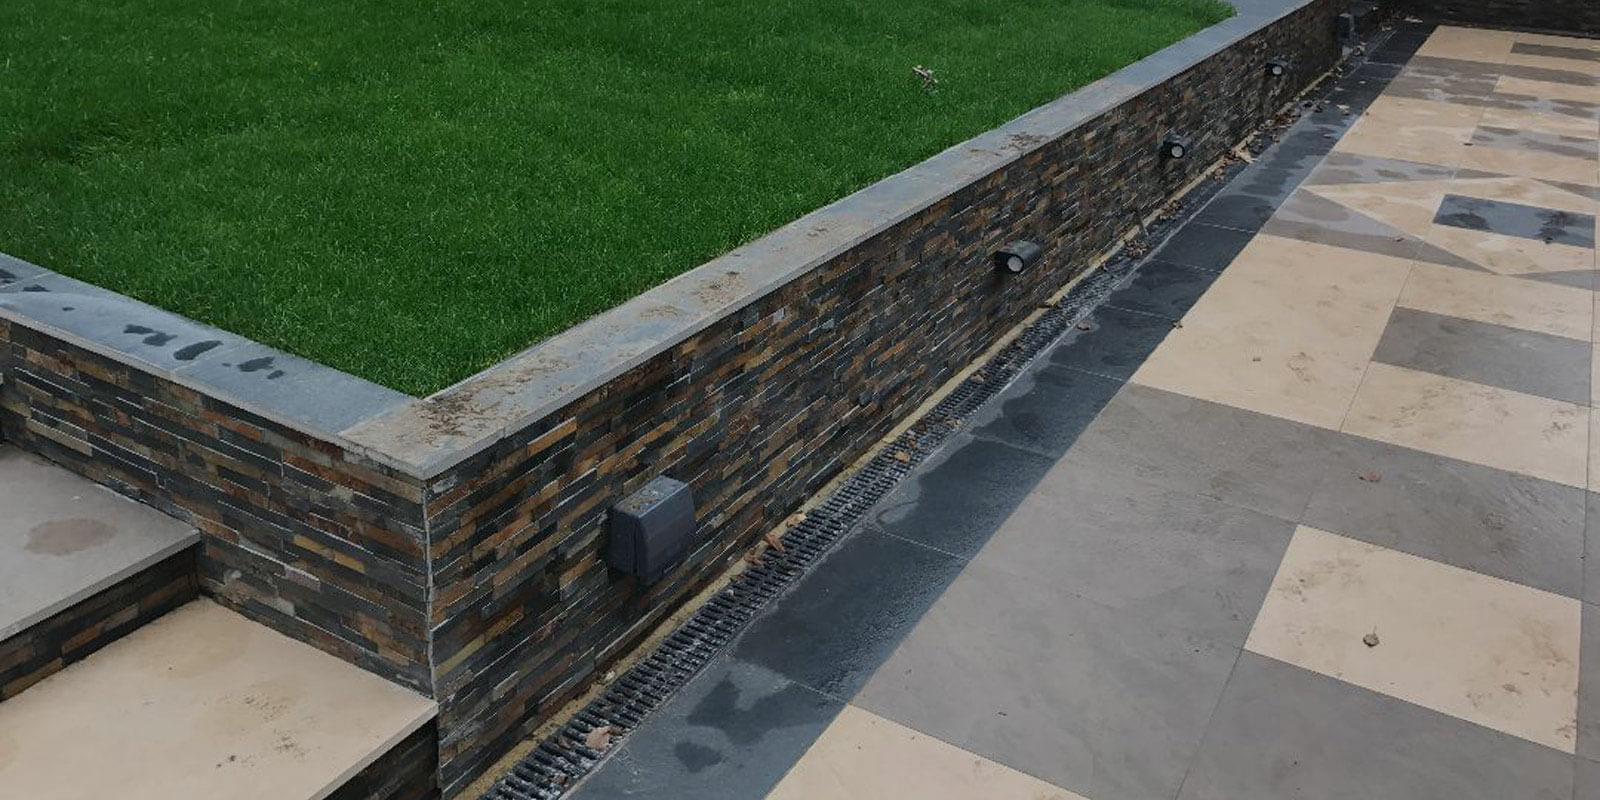 Countywide Paving and Landscapes Slider